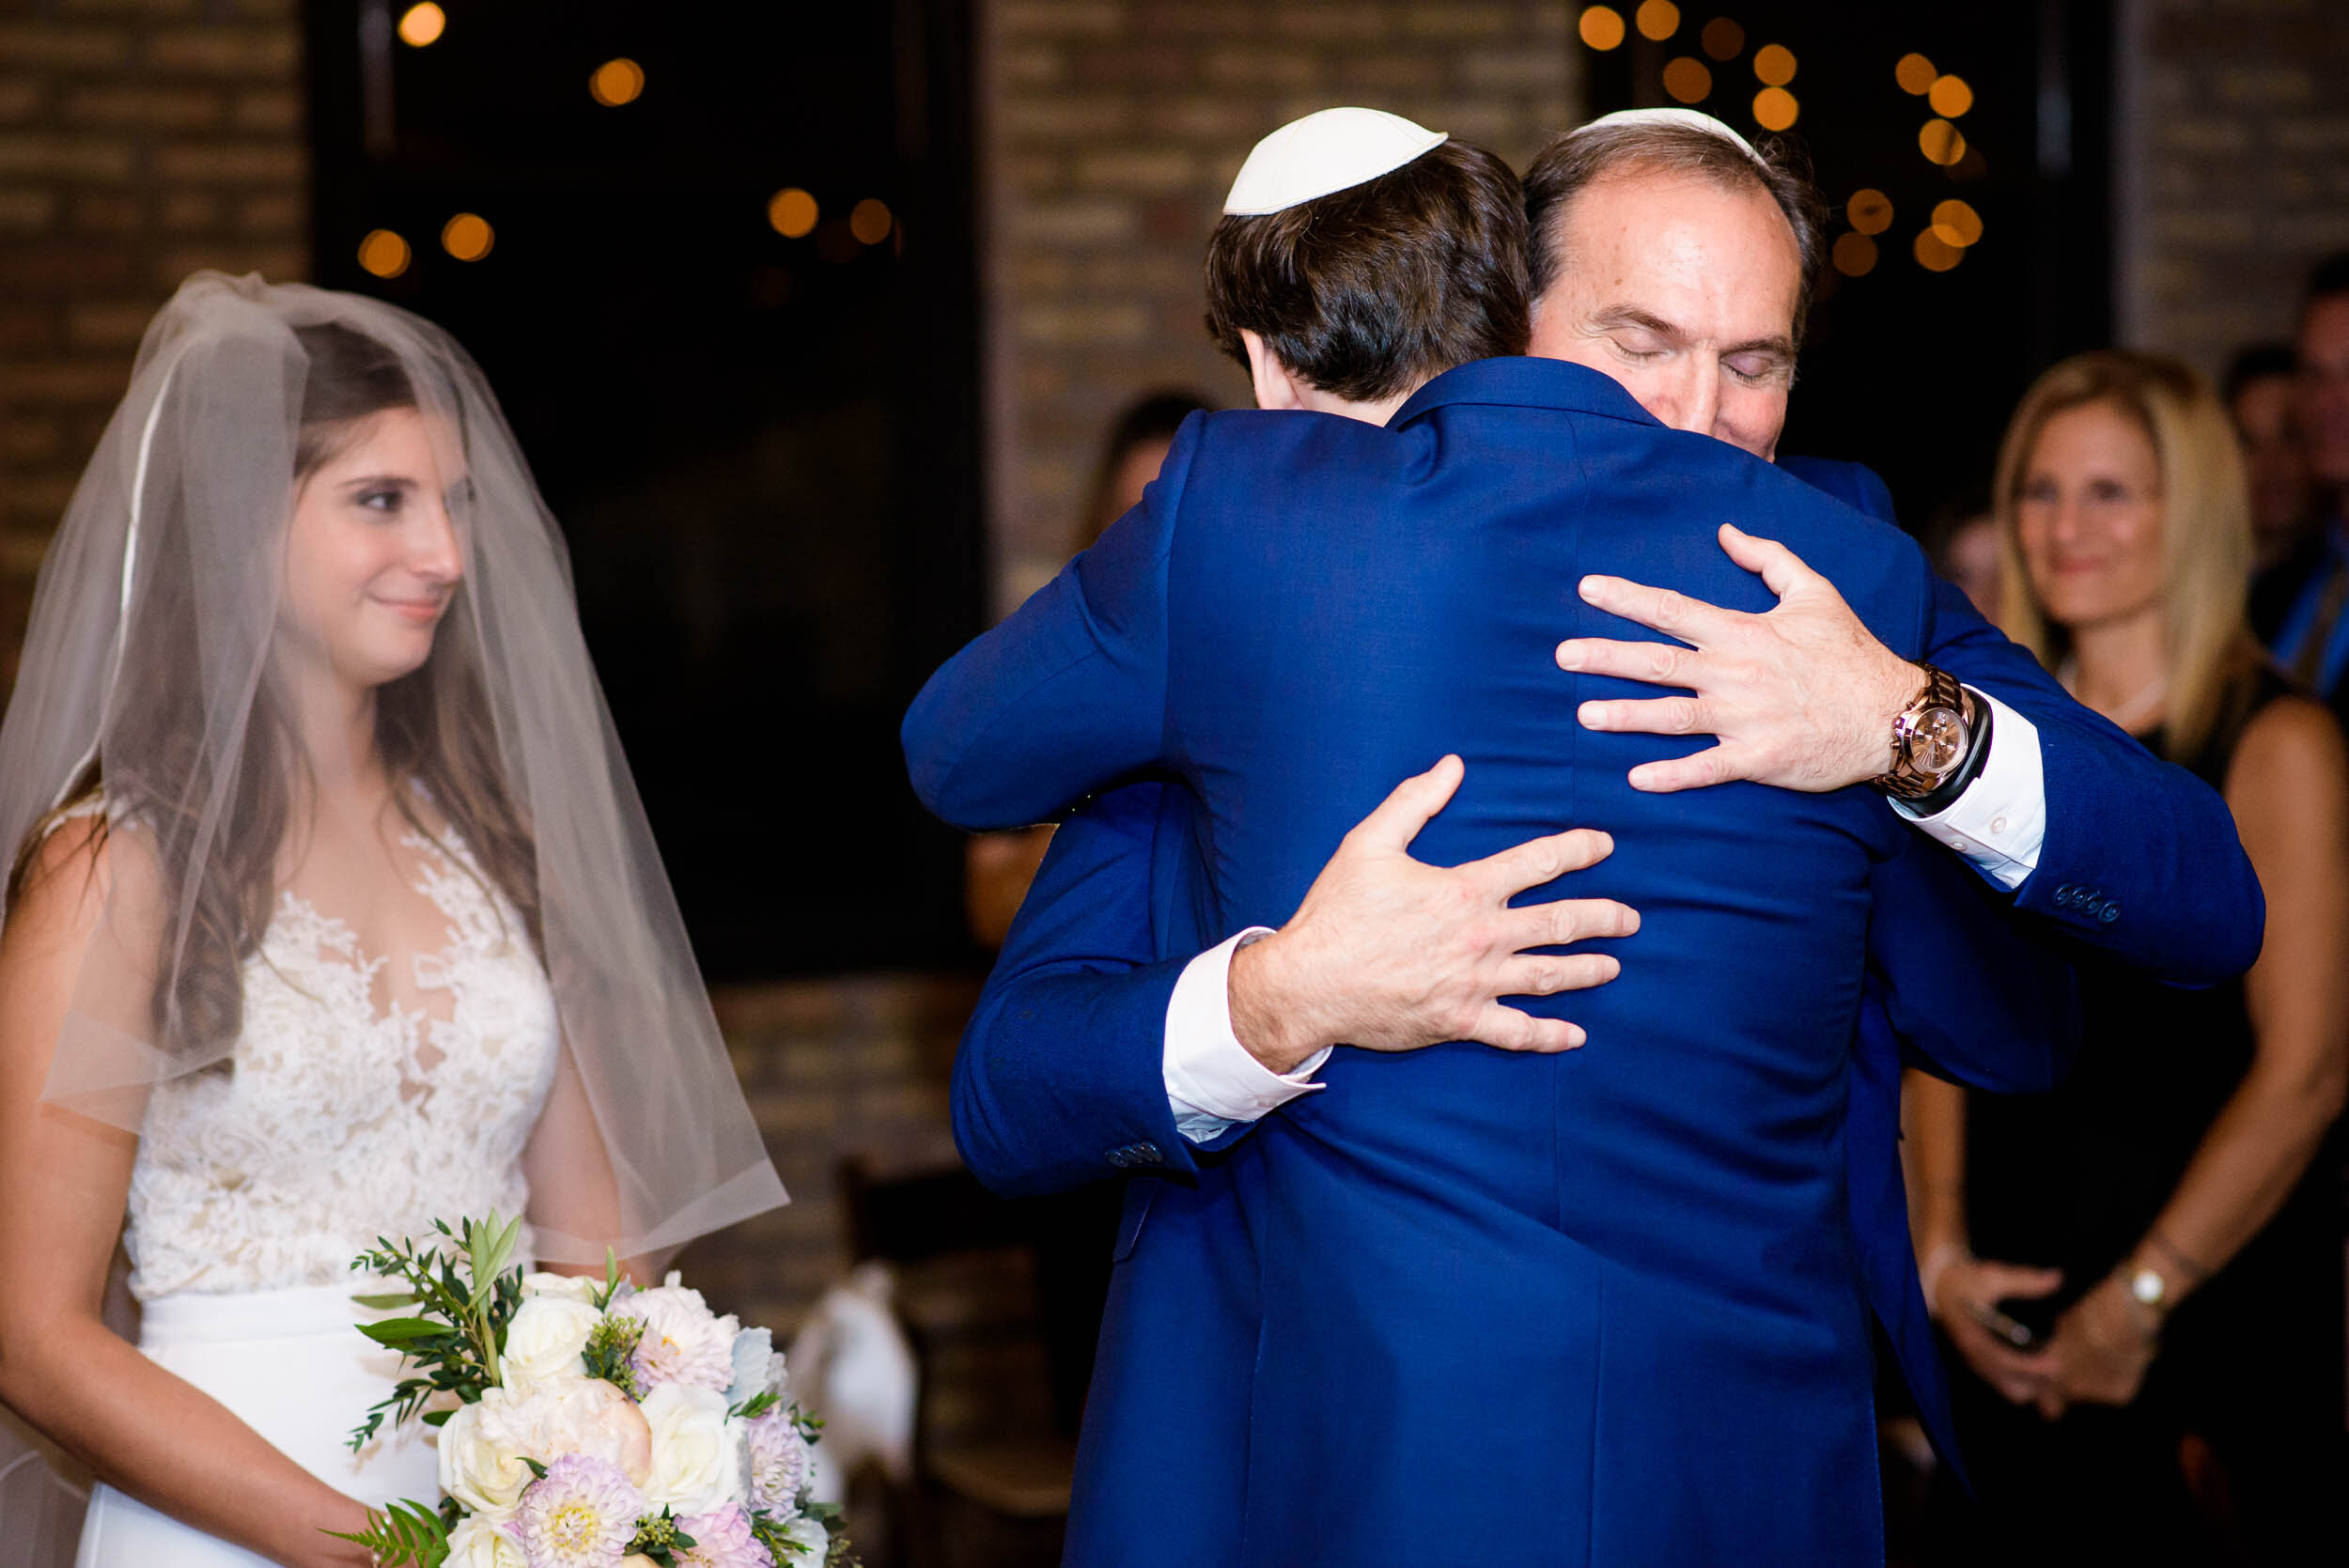 Father of the bride and groom hug during the ceremony: Ravenswood Event Center Chicago wedding captured by J. Brown Photography.  